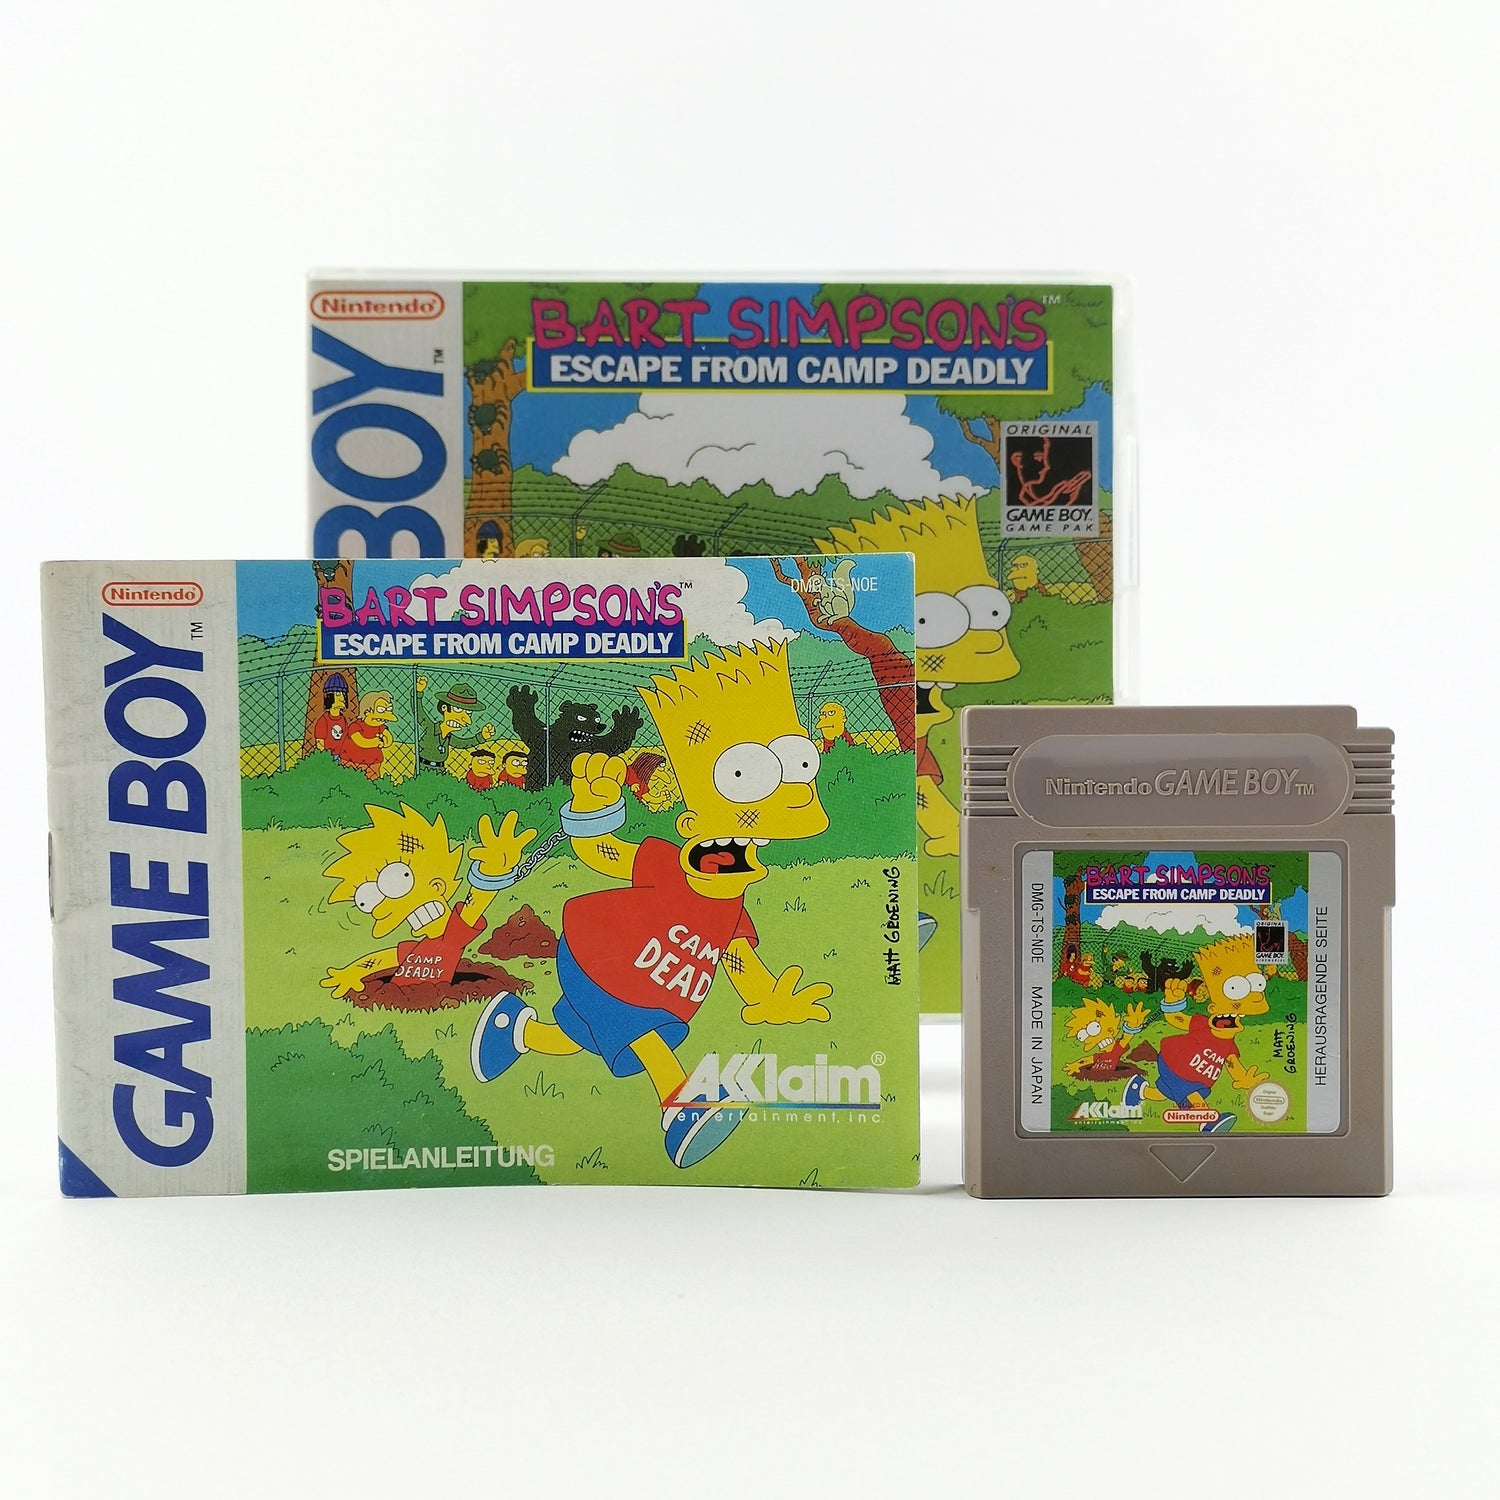 Nintendo Game Boy Classic Game: Bart Simpson's Escape from Camp Deadly - Module